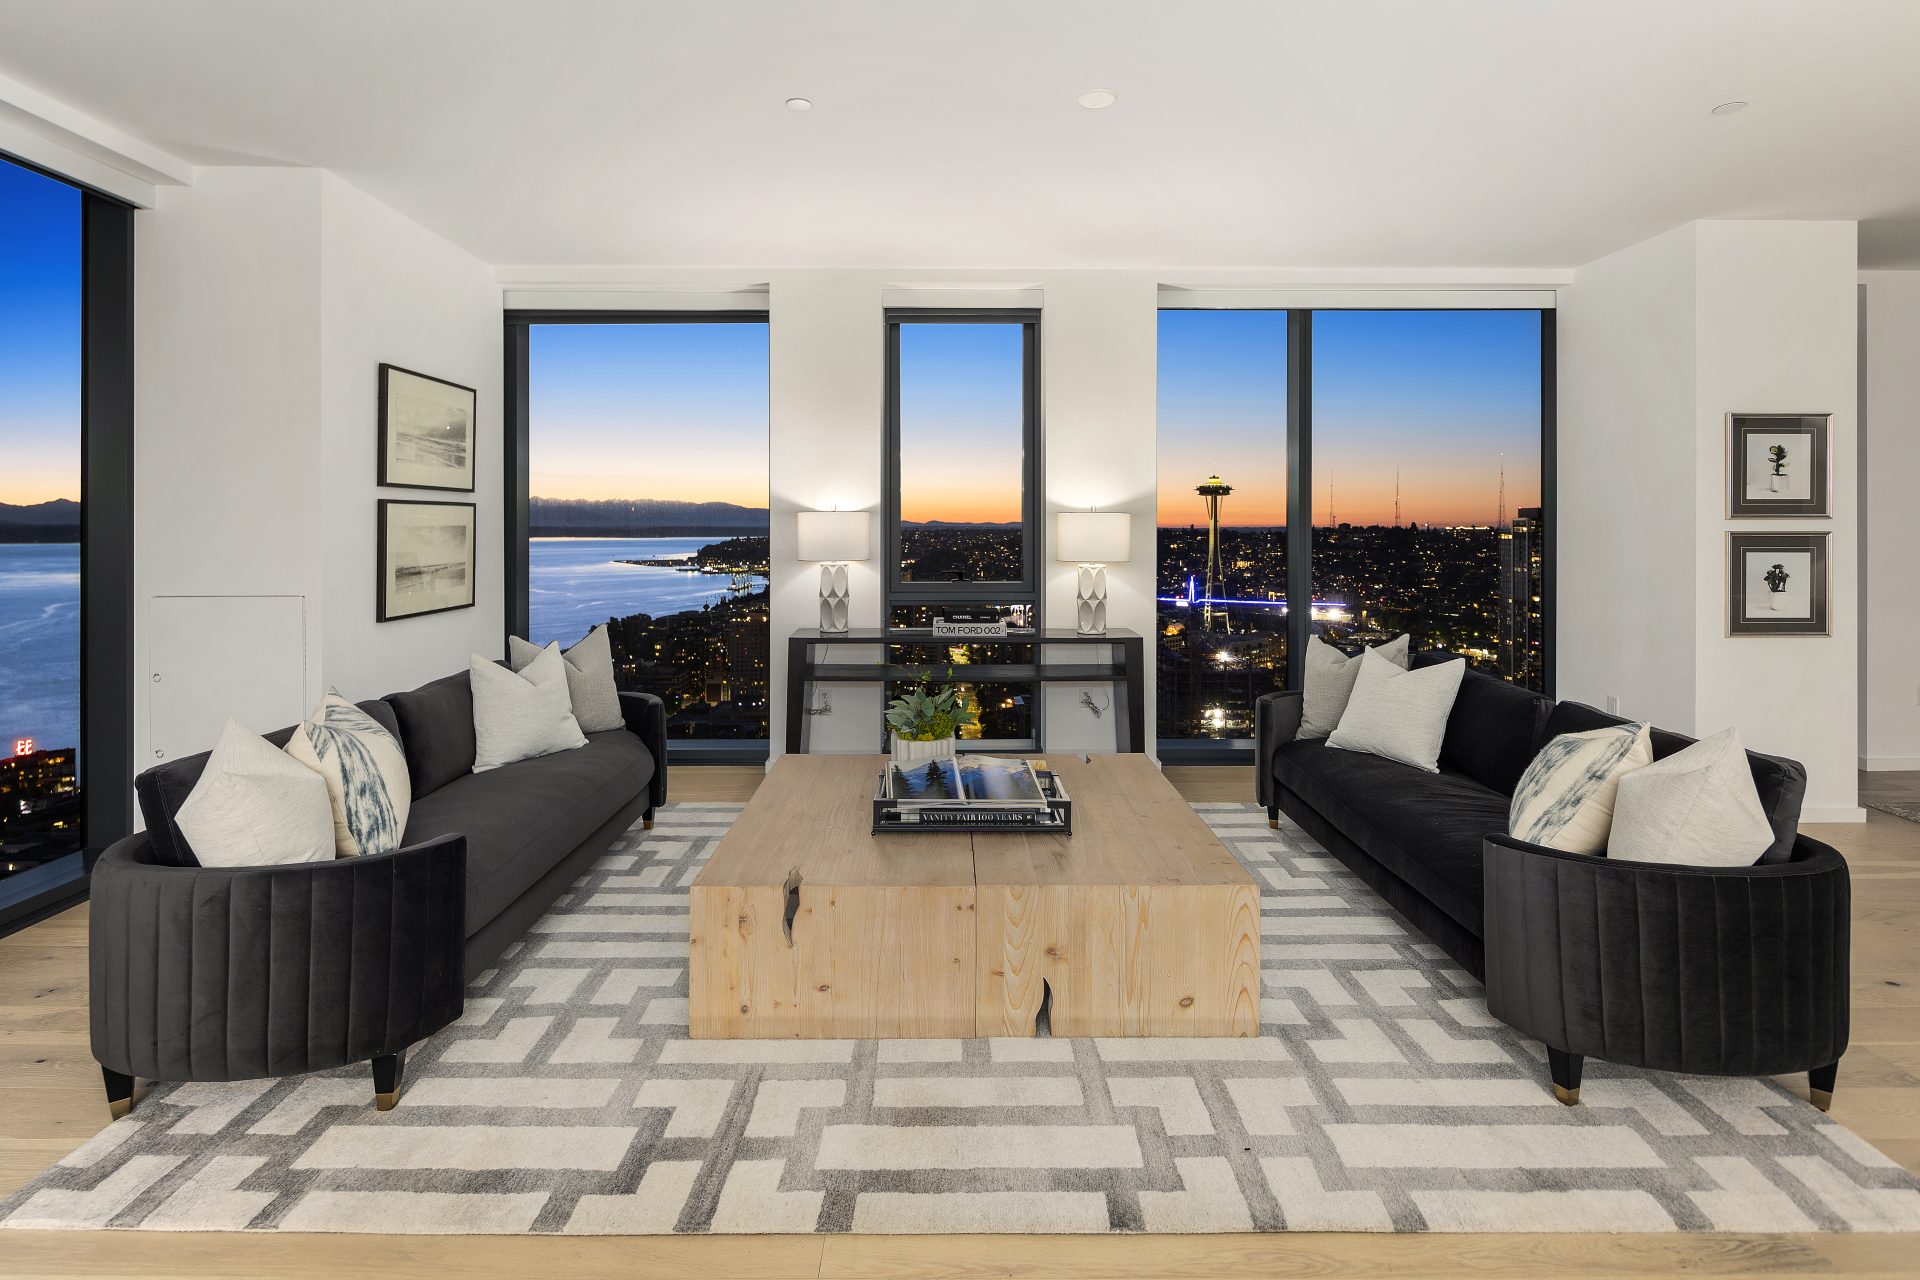 floor to ceiling windows frame sweeping views of downtown seattle and elliott bay